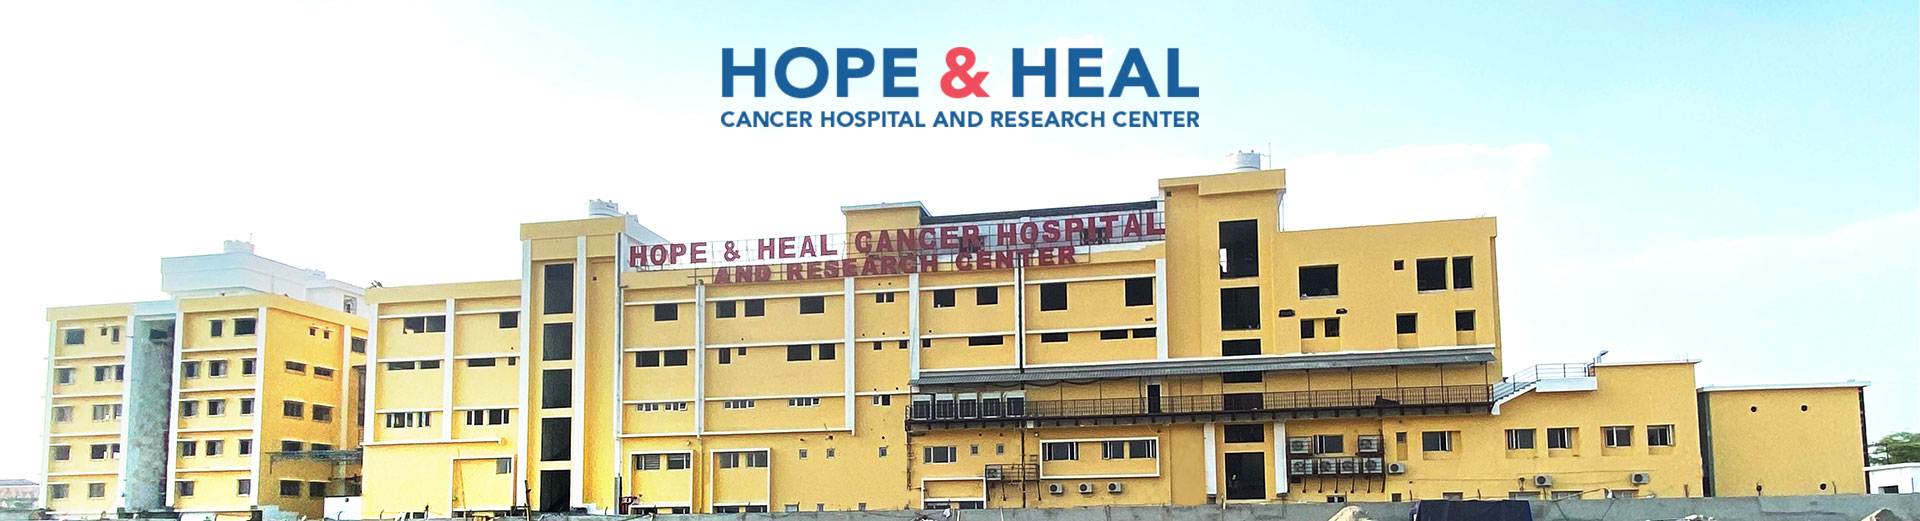 Hope & Heal Cancer Hospital & Research Center Building